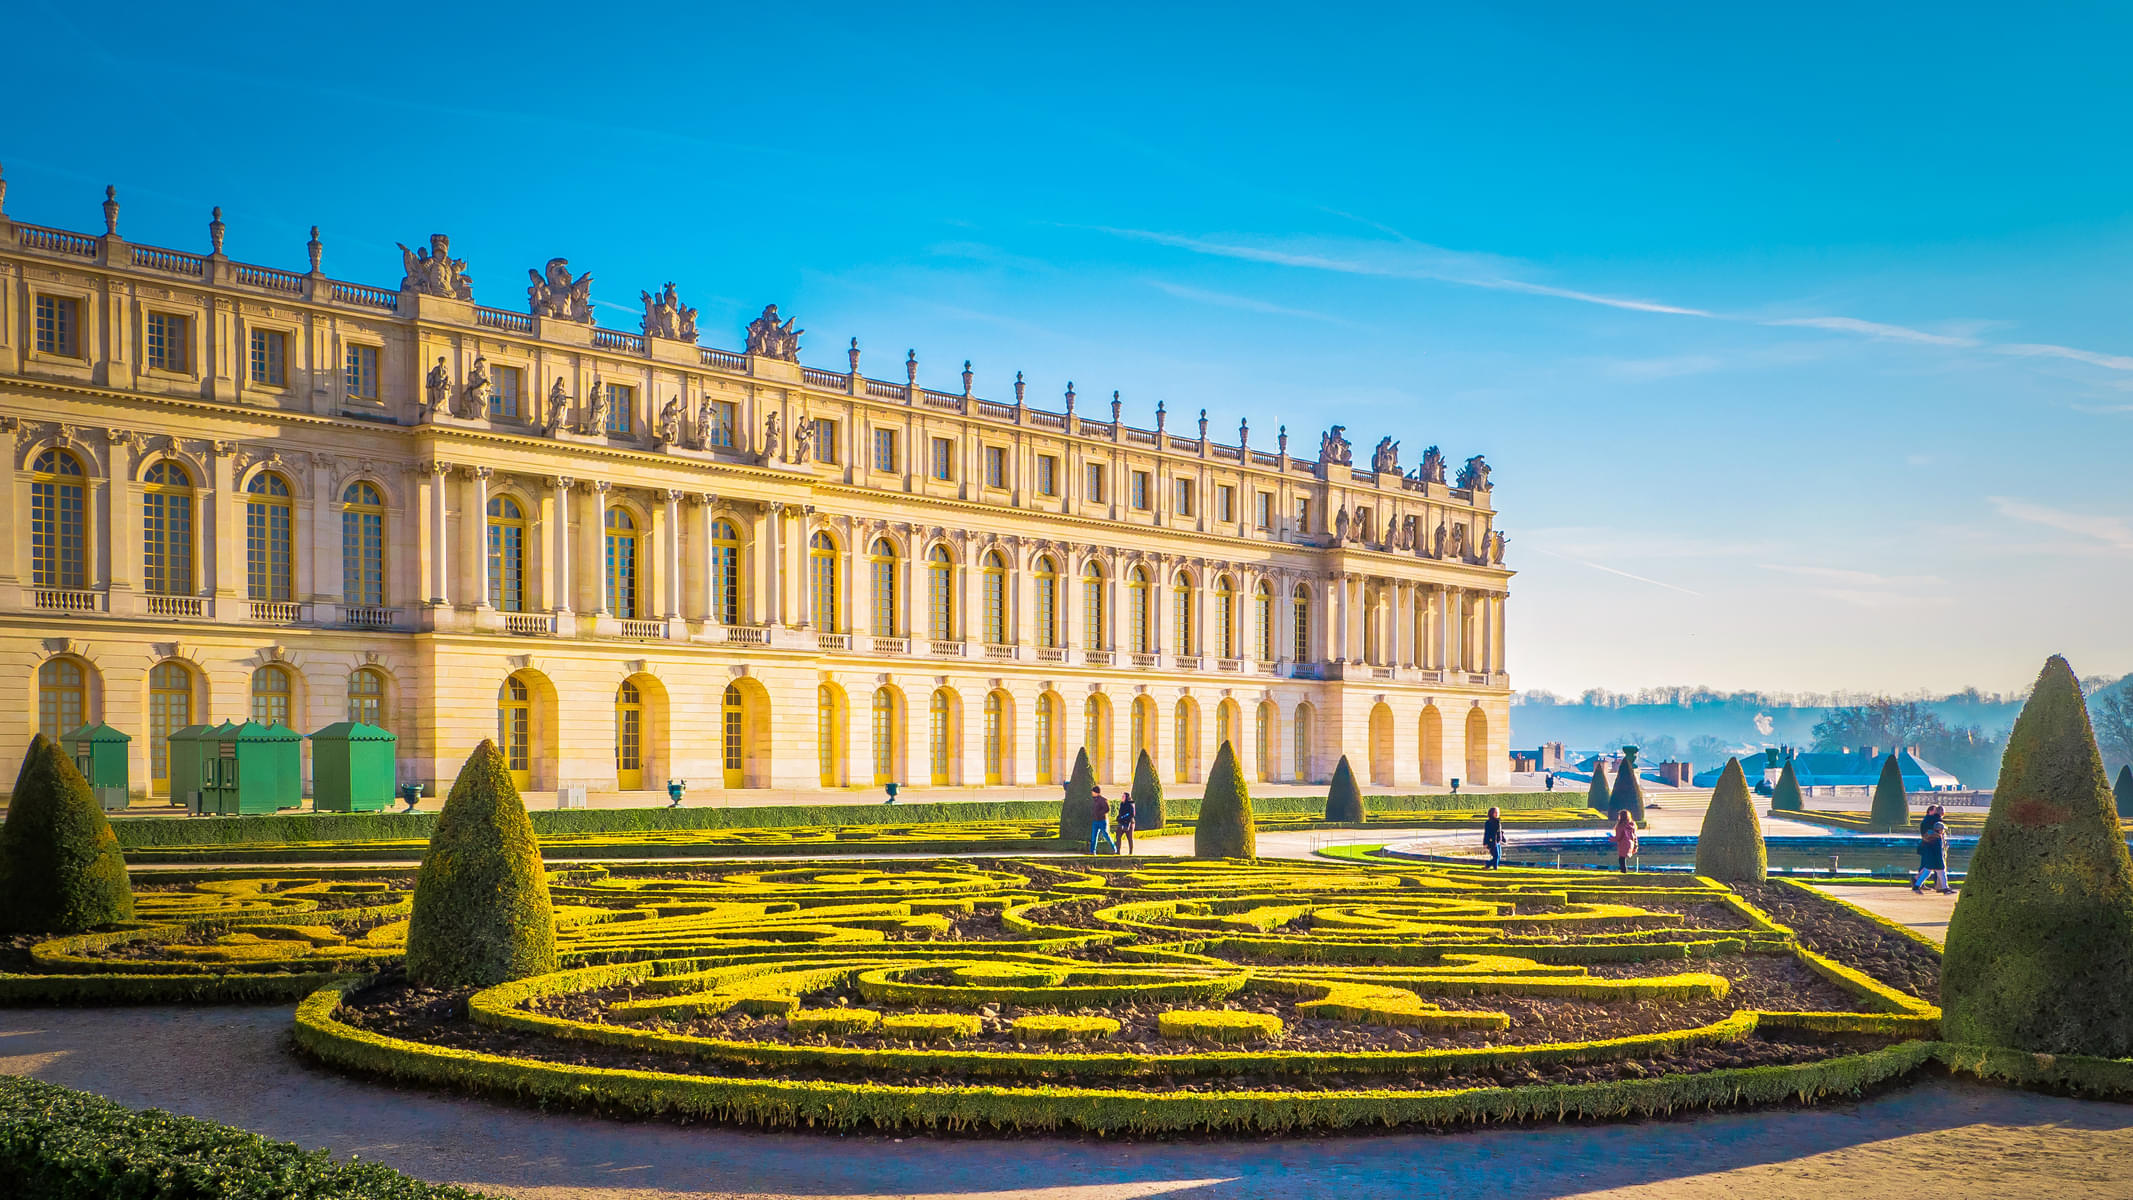 Take in the grandness of Palace of Versailles